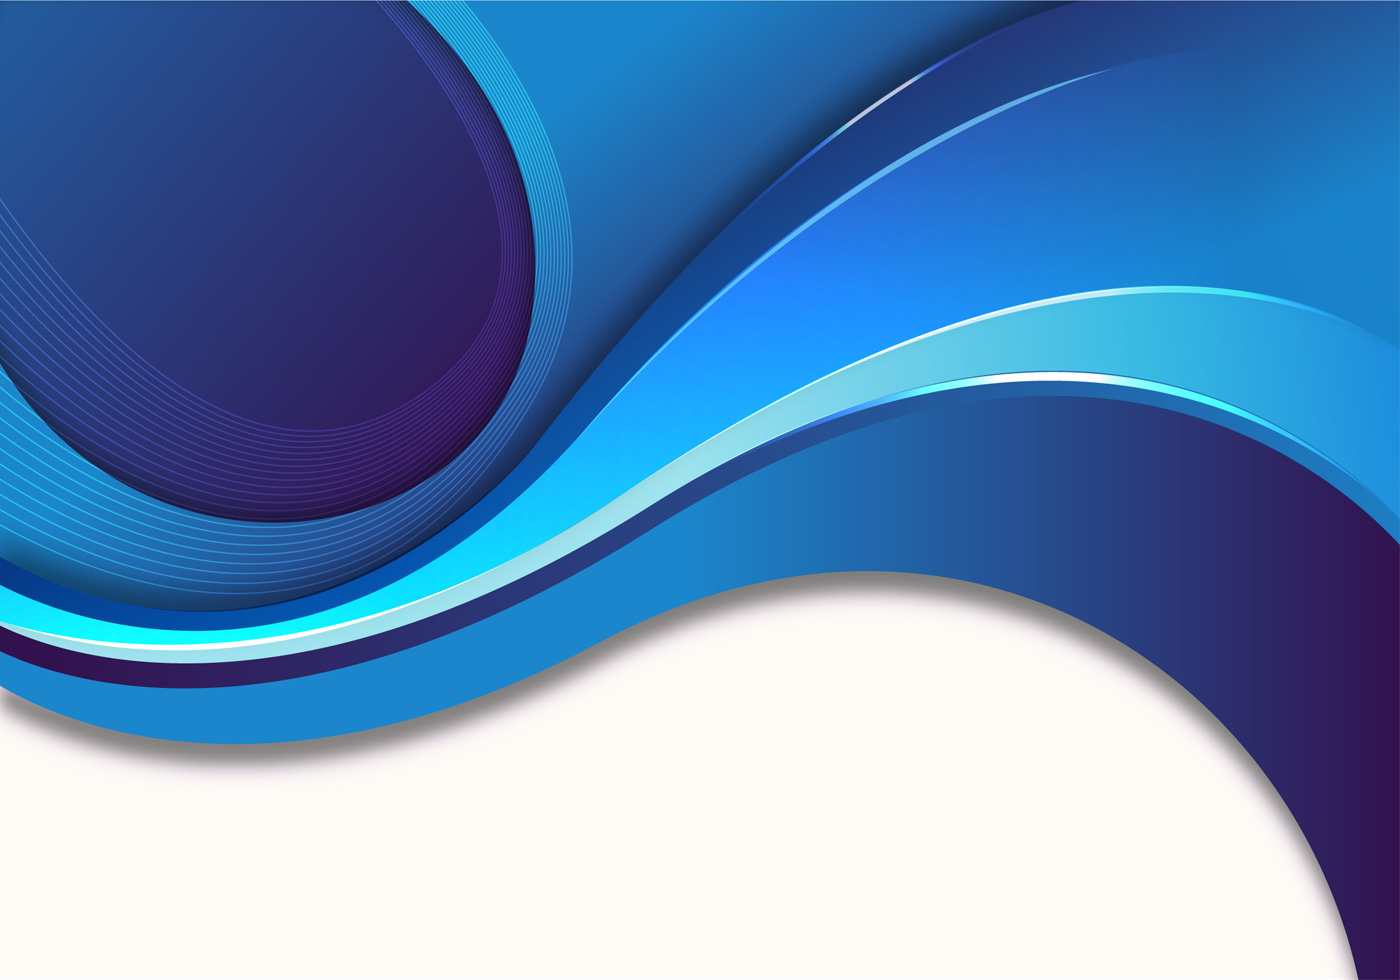 Blue Abstract Wave Vector Wallpaper - Abstract Wallpaper Vector , HD Wallpaper & Backgrounds